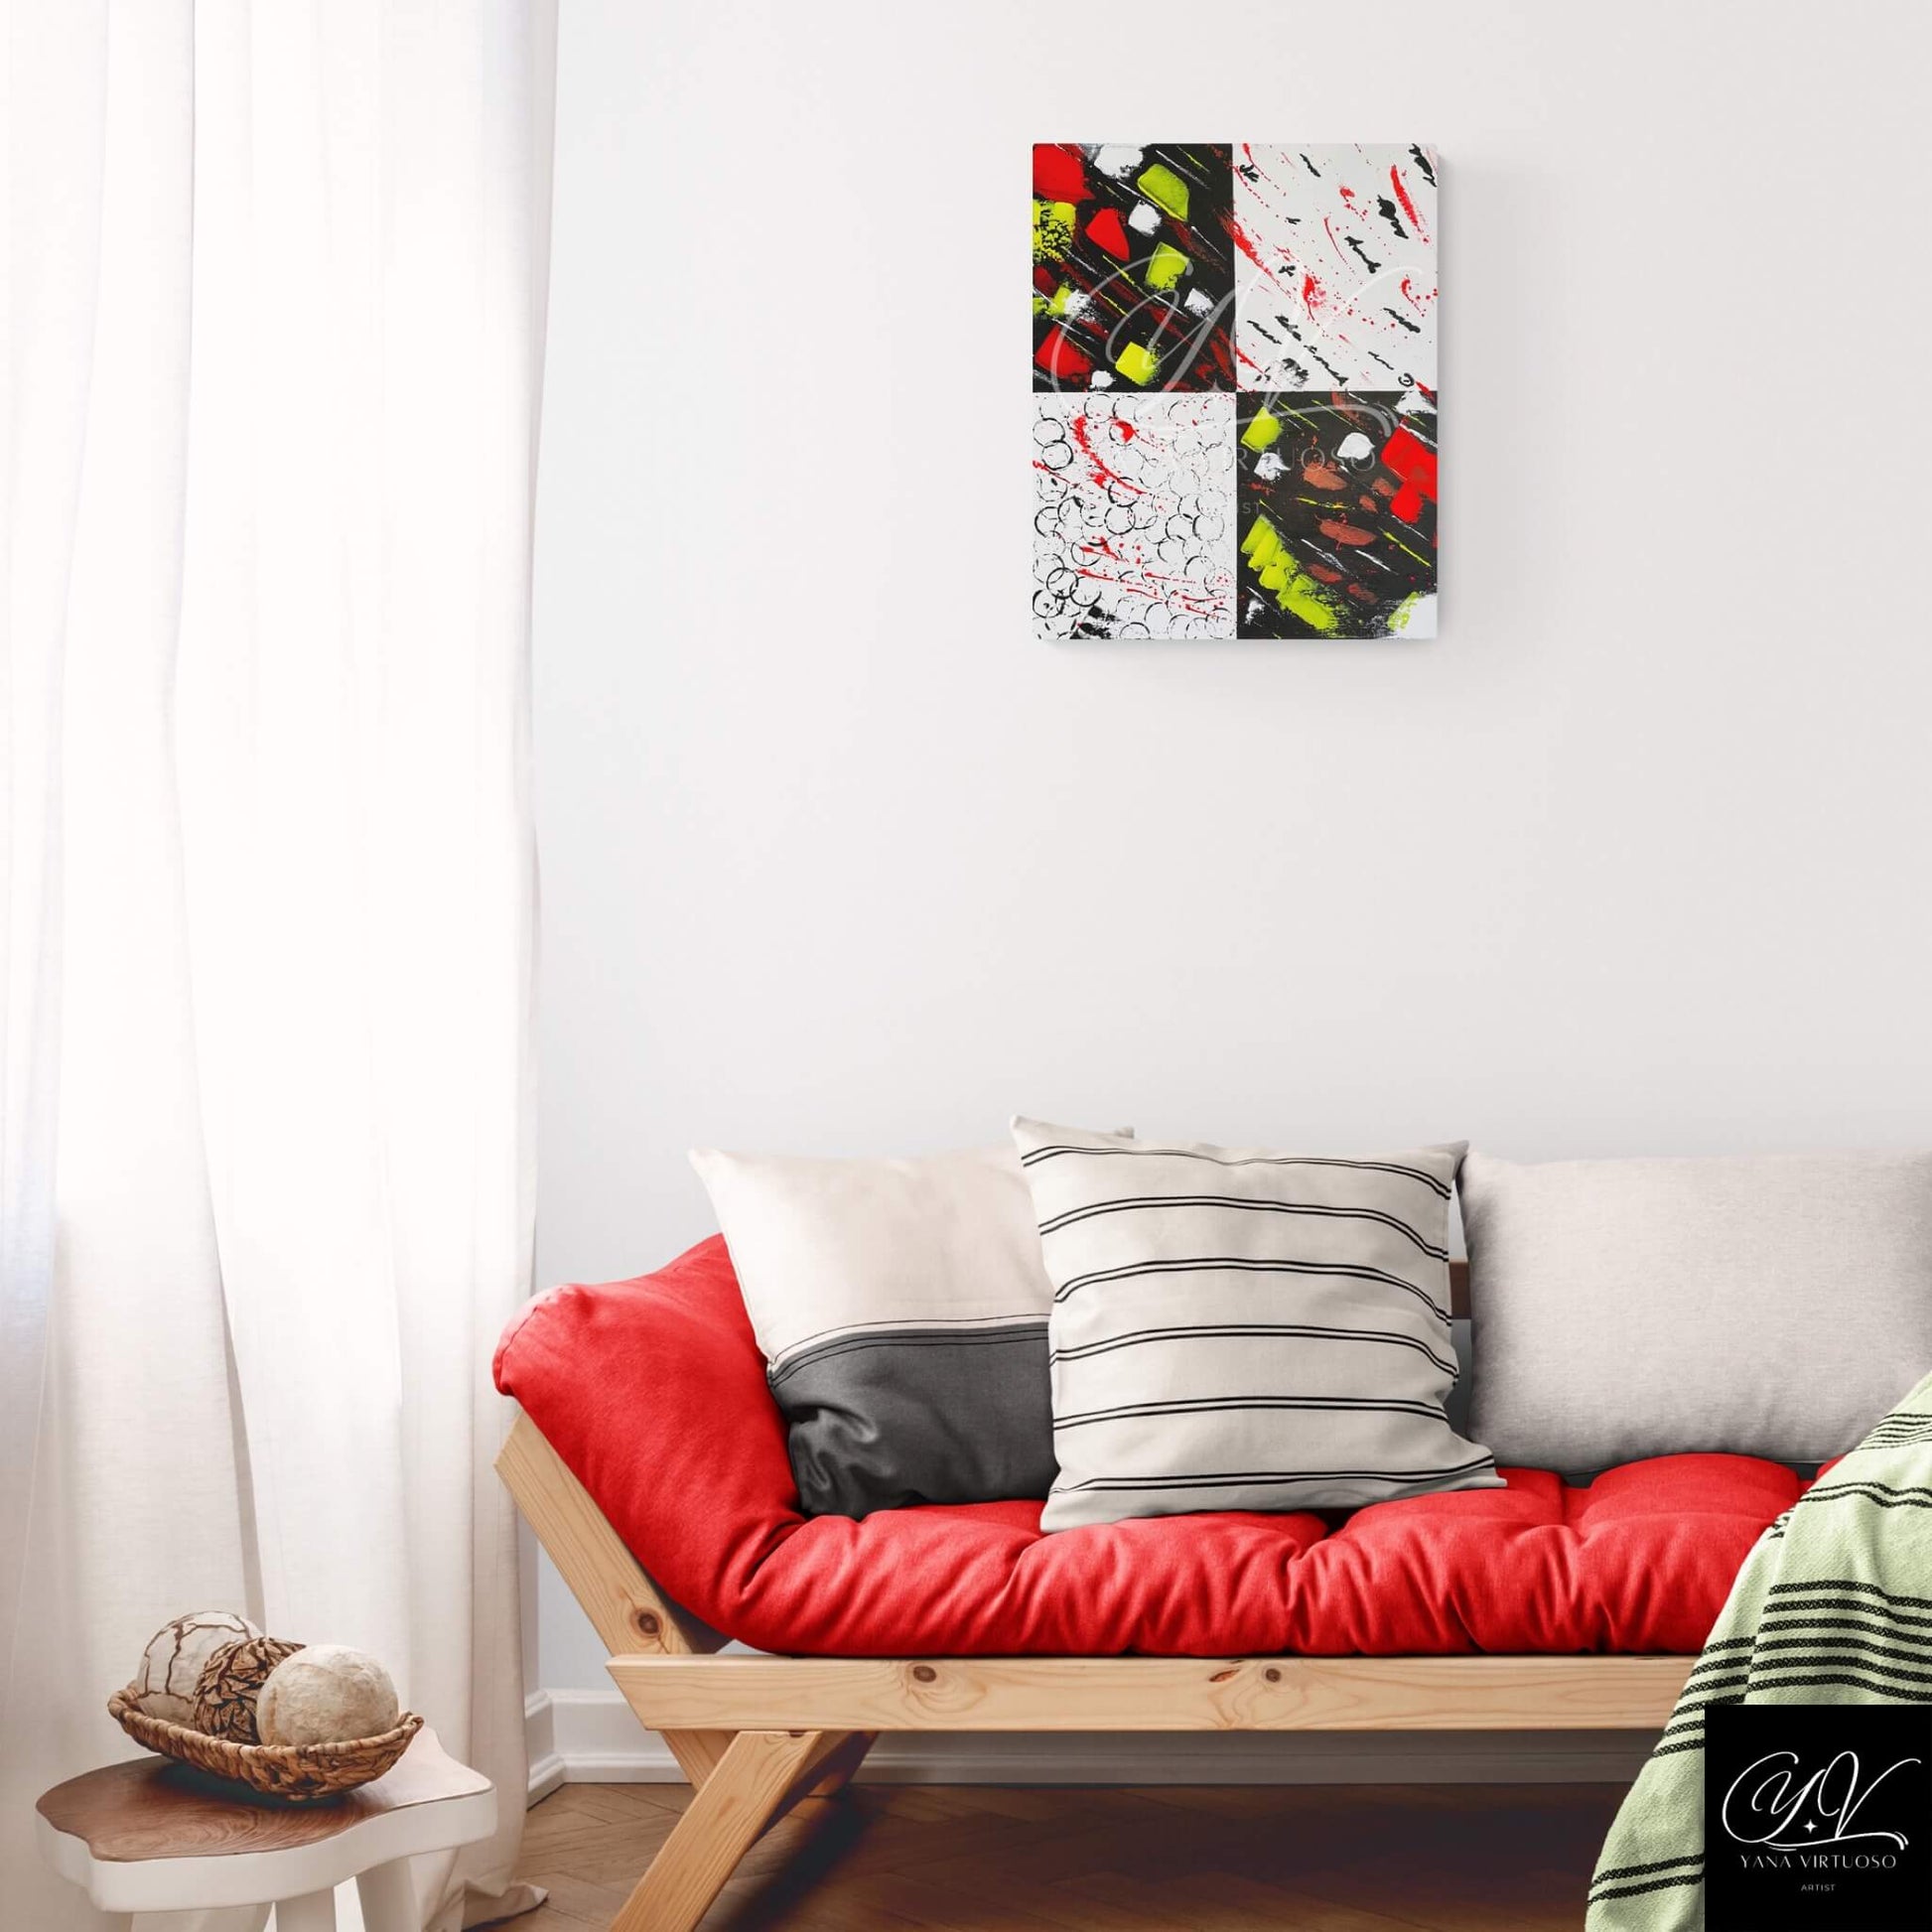 Full view of "Flight of Human Emotions" displayed in a living room interior, integrating the emotional depth and vibrant colors of the artwork into the home environment, encouraging reflection and complementing the room's aesthetics.